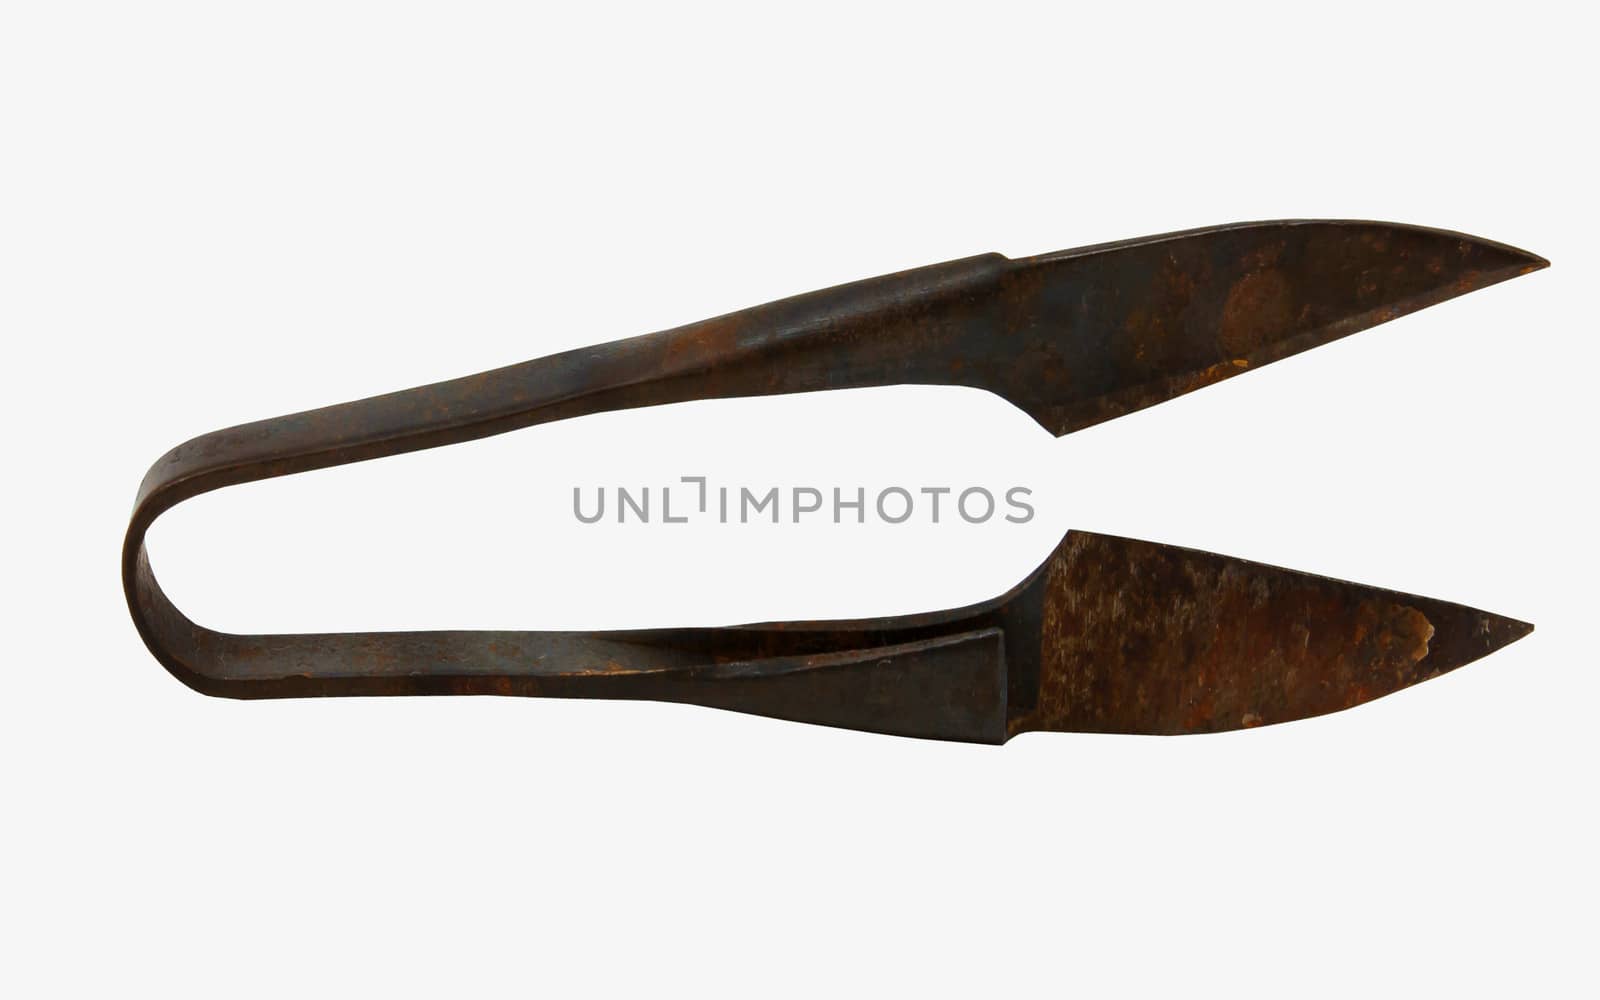 Old rusty sheep shearing scissors, isolated on white by sutipp11